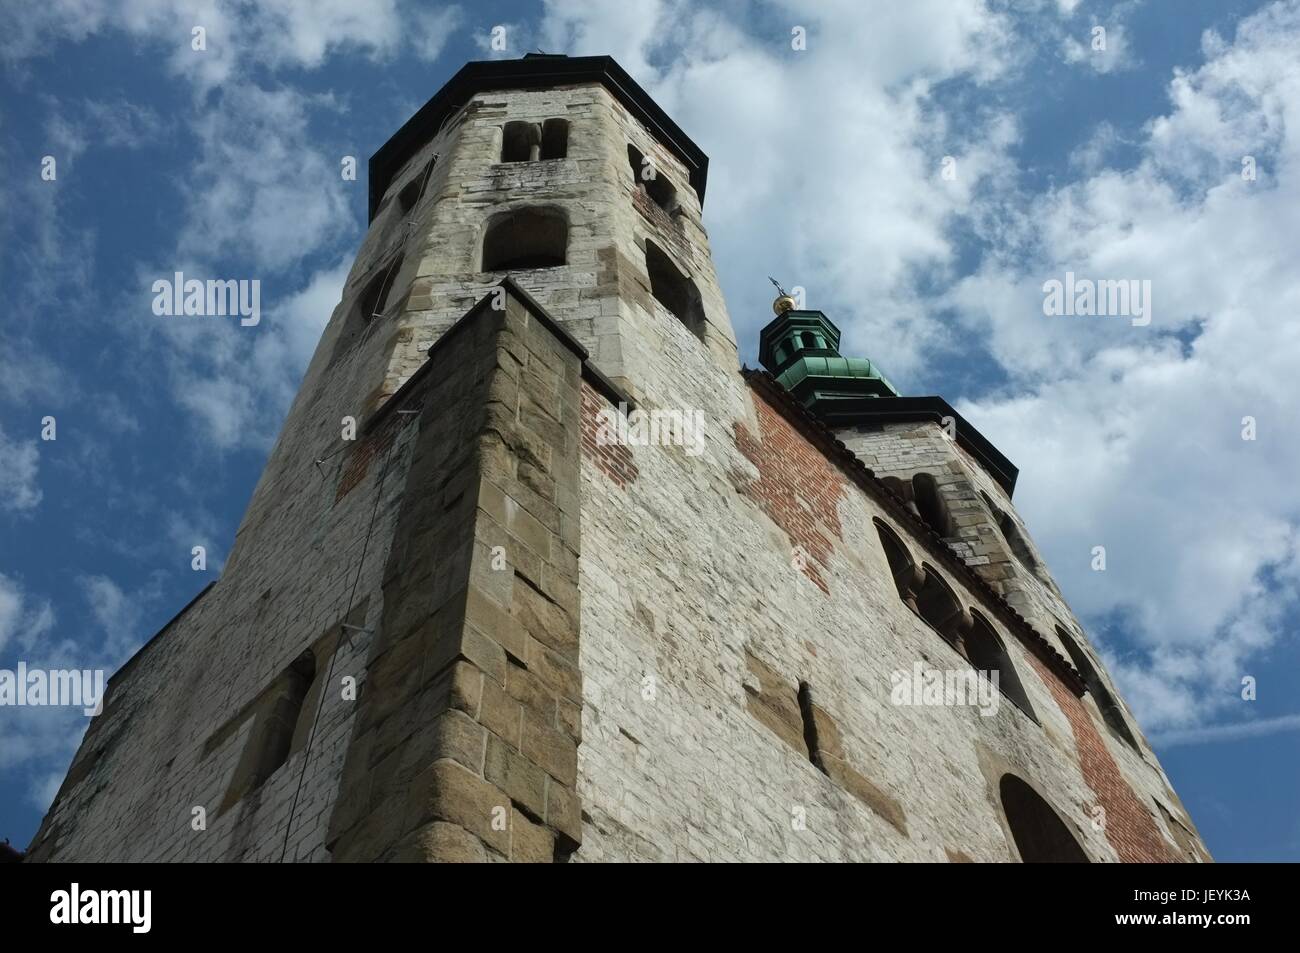 St Andrew's Church in the Old Town, Krakow, Poland, Central/Eastern Europe, June 2017. Stock Photo